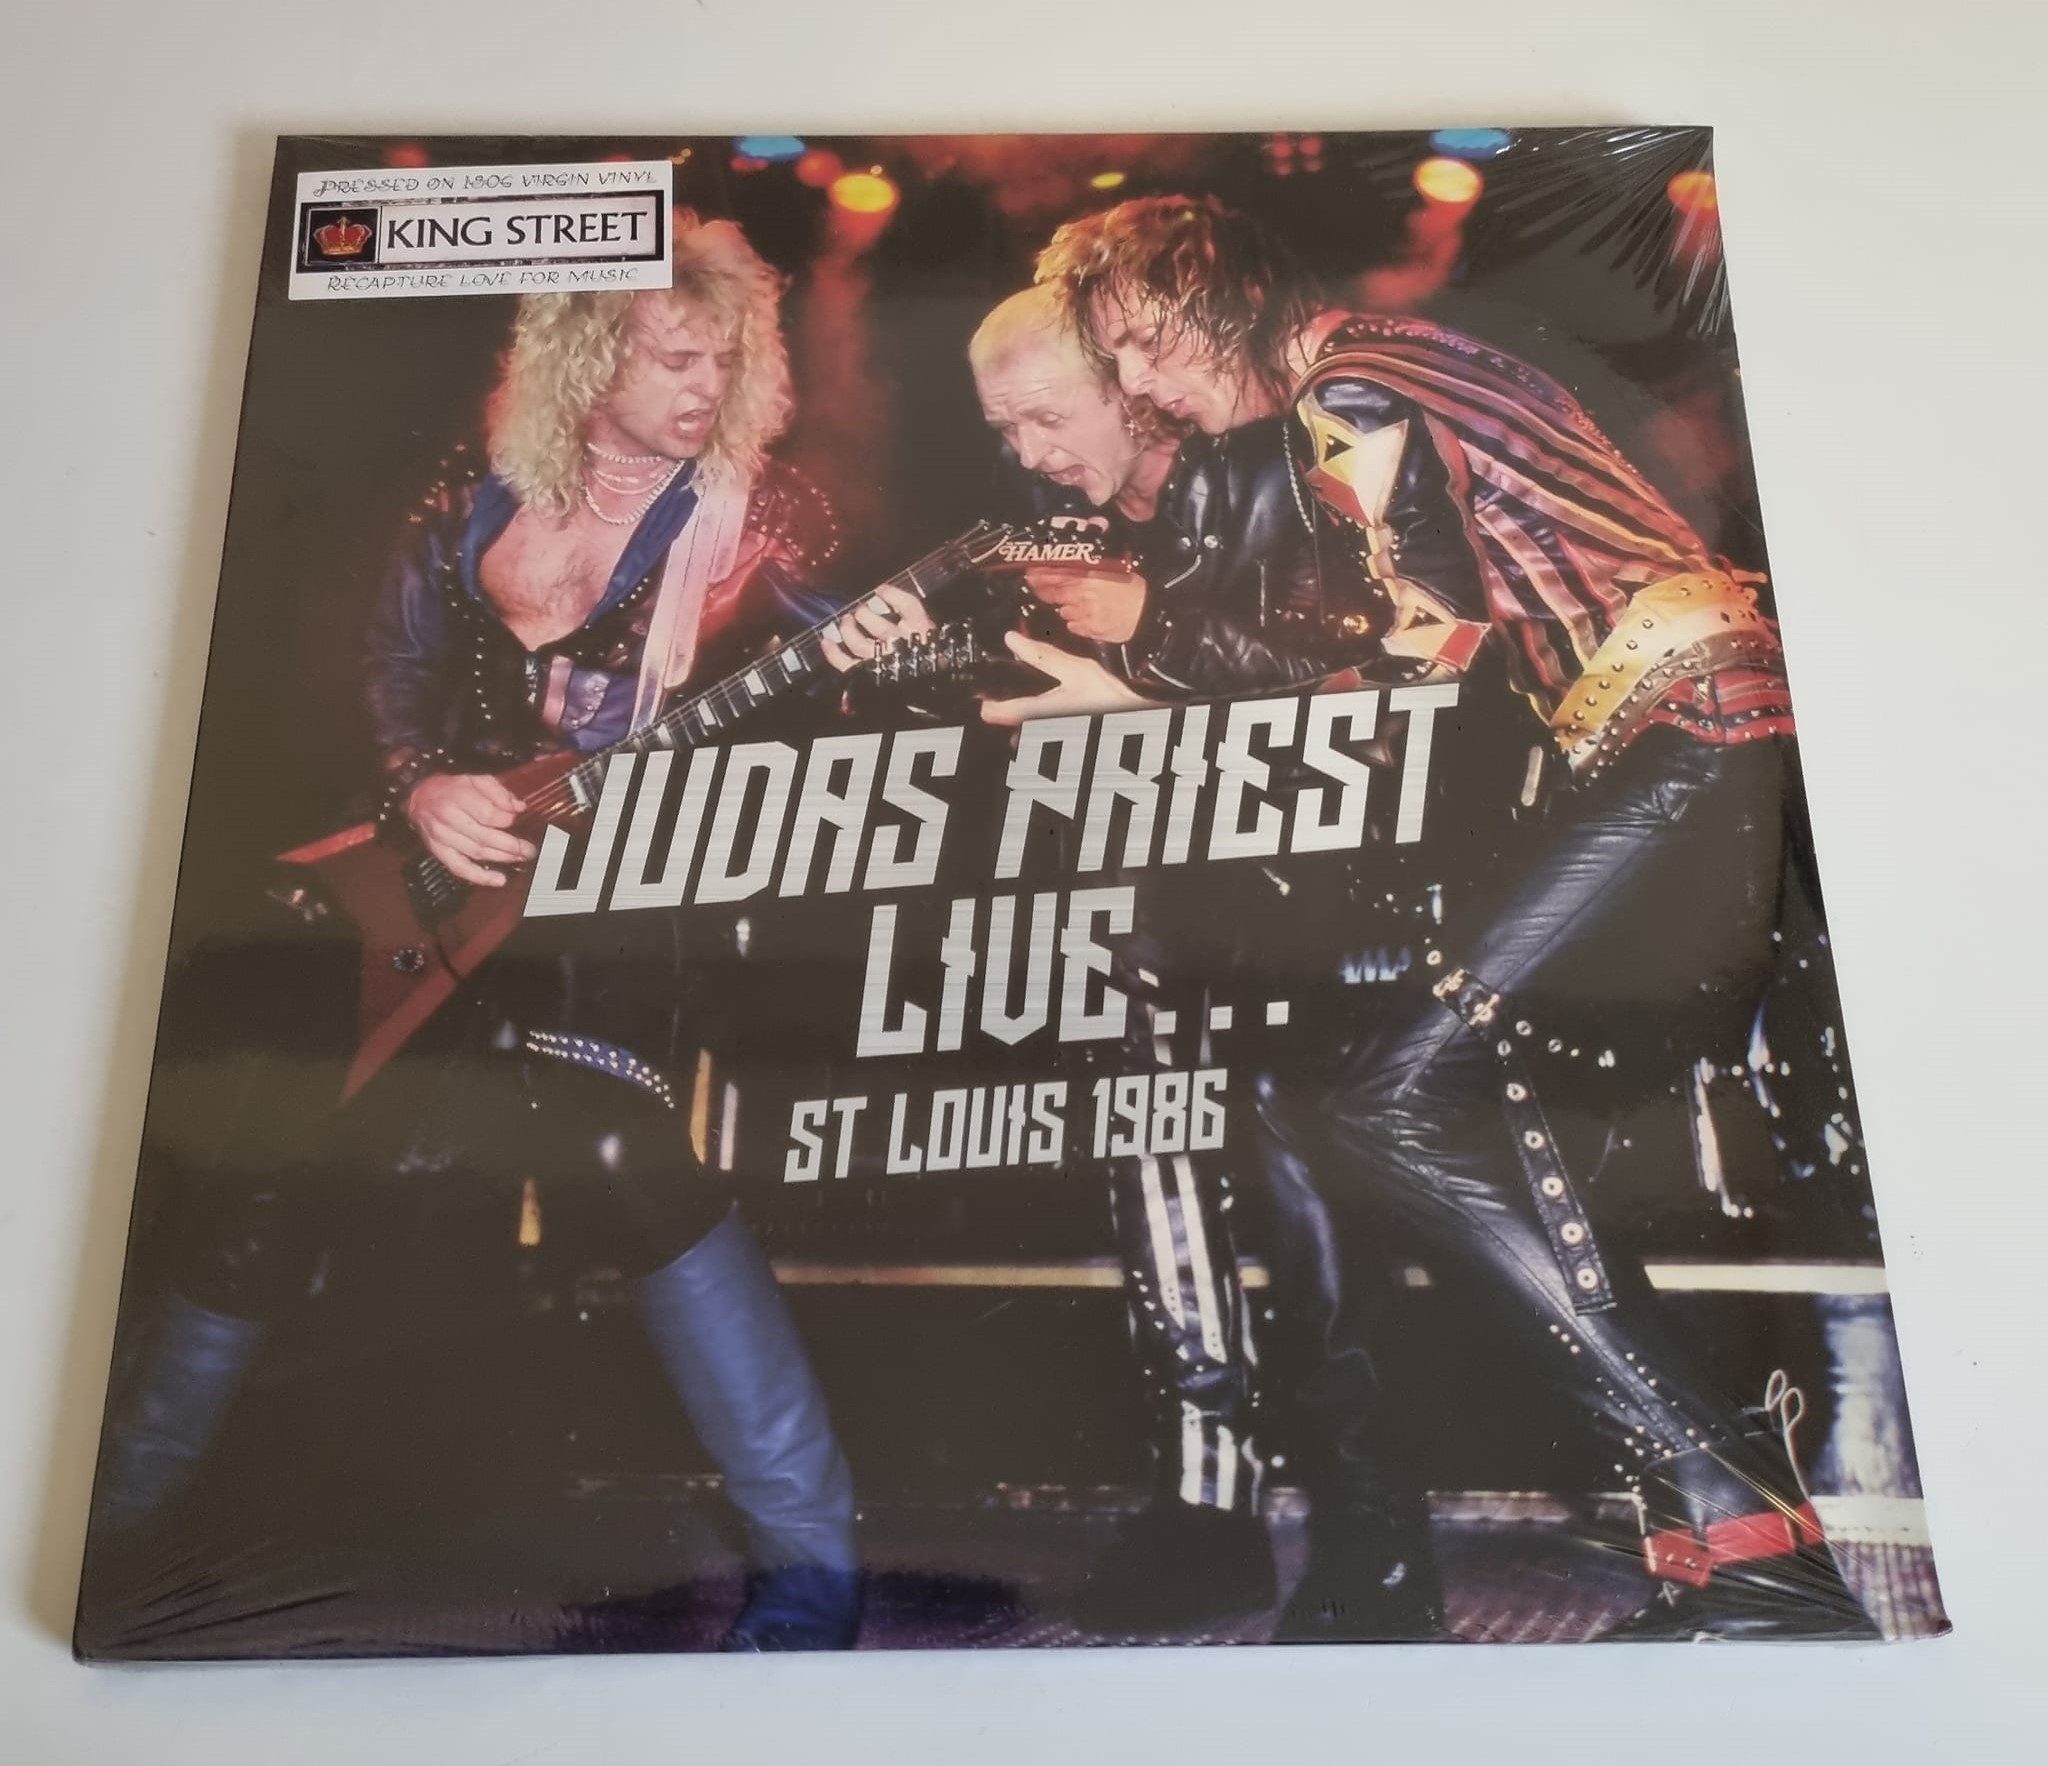 Buy this rare Judas Priest record by clicking here